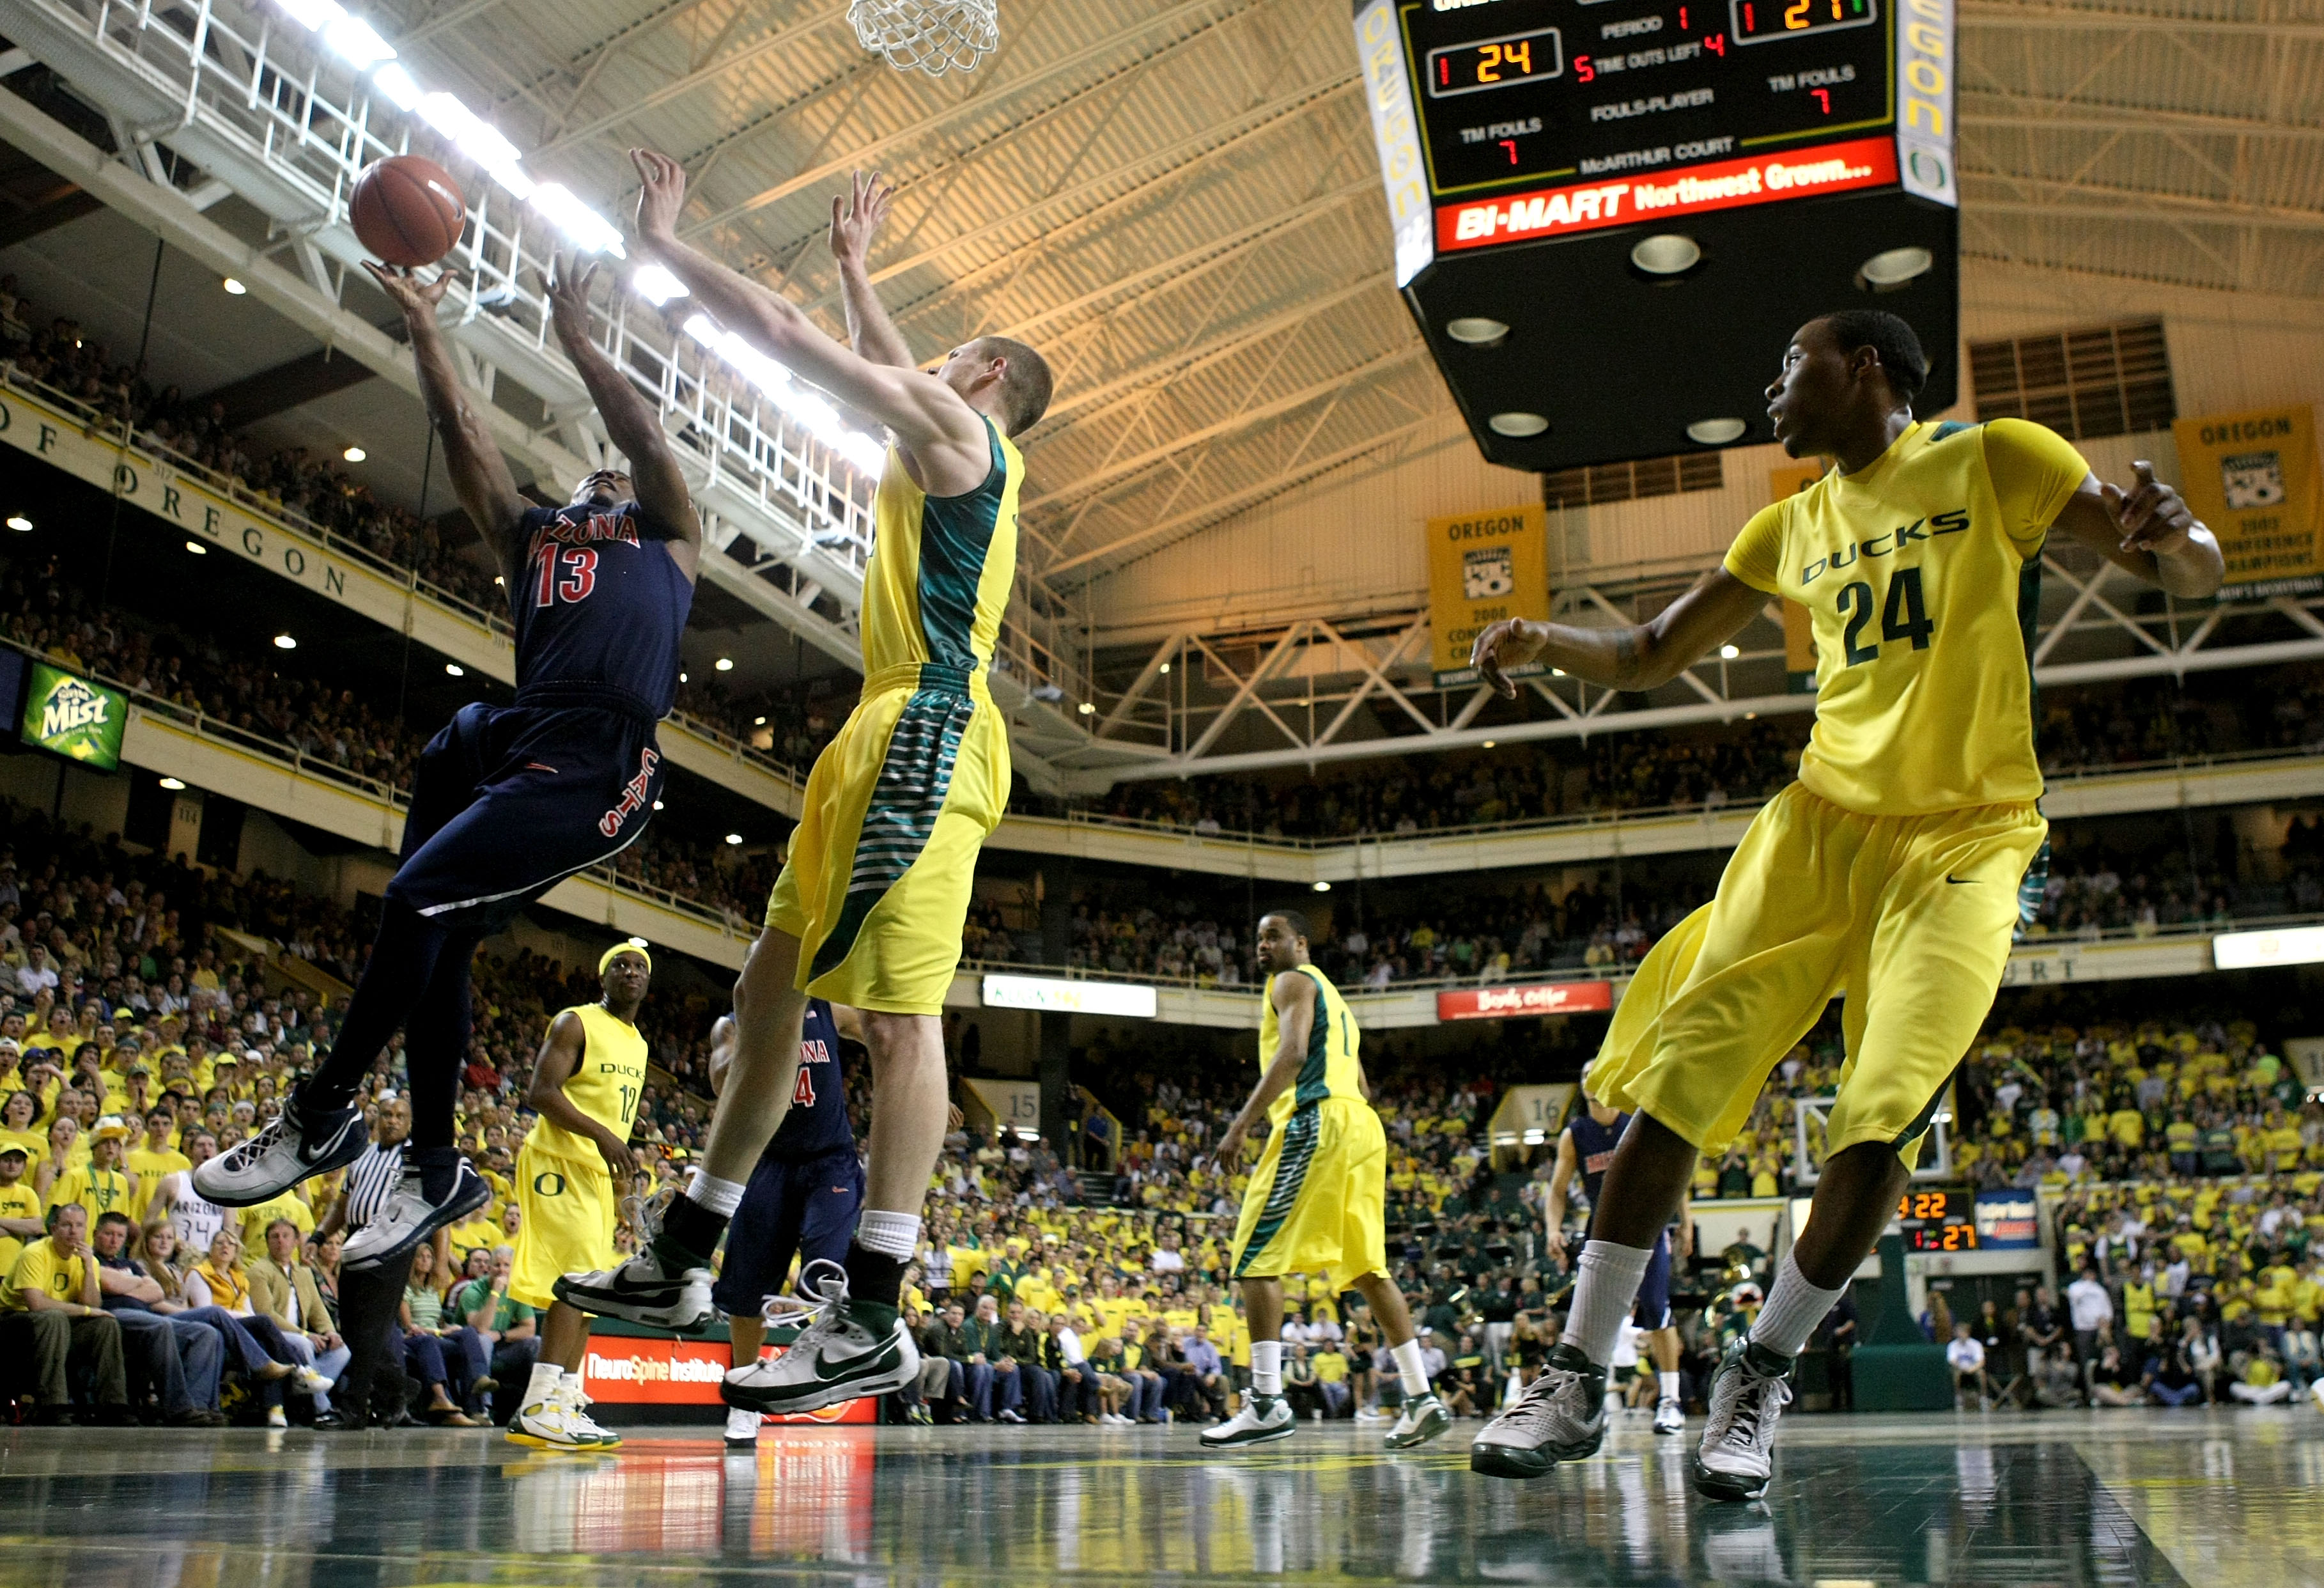 EUGENE, OR - MARCH 8:  Nic Wise #13 of the Arizona Wildcats lays up the ball agianst Maarty Leunen #10 of the Oregon Ducks at MacArthur Court March 8, 2008 in Eugene, Oregon.  (Photo by Jonathan Ferrey/Getty Images)